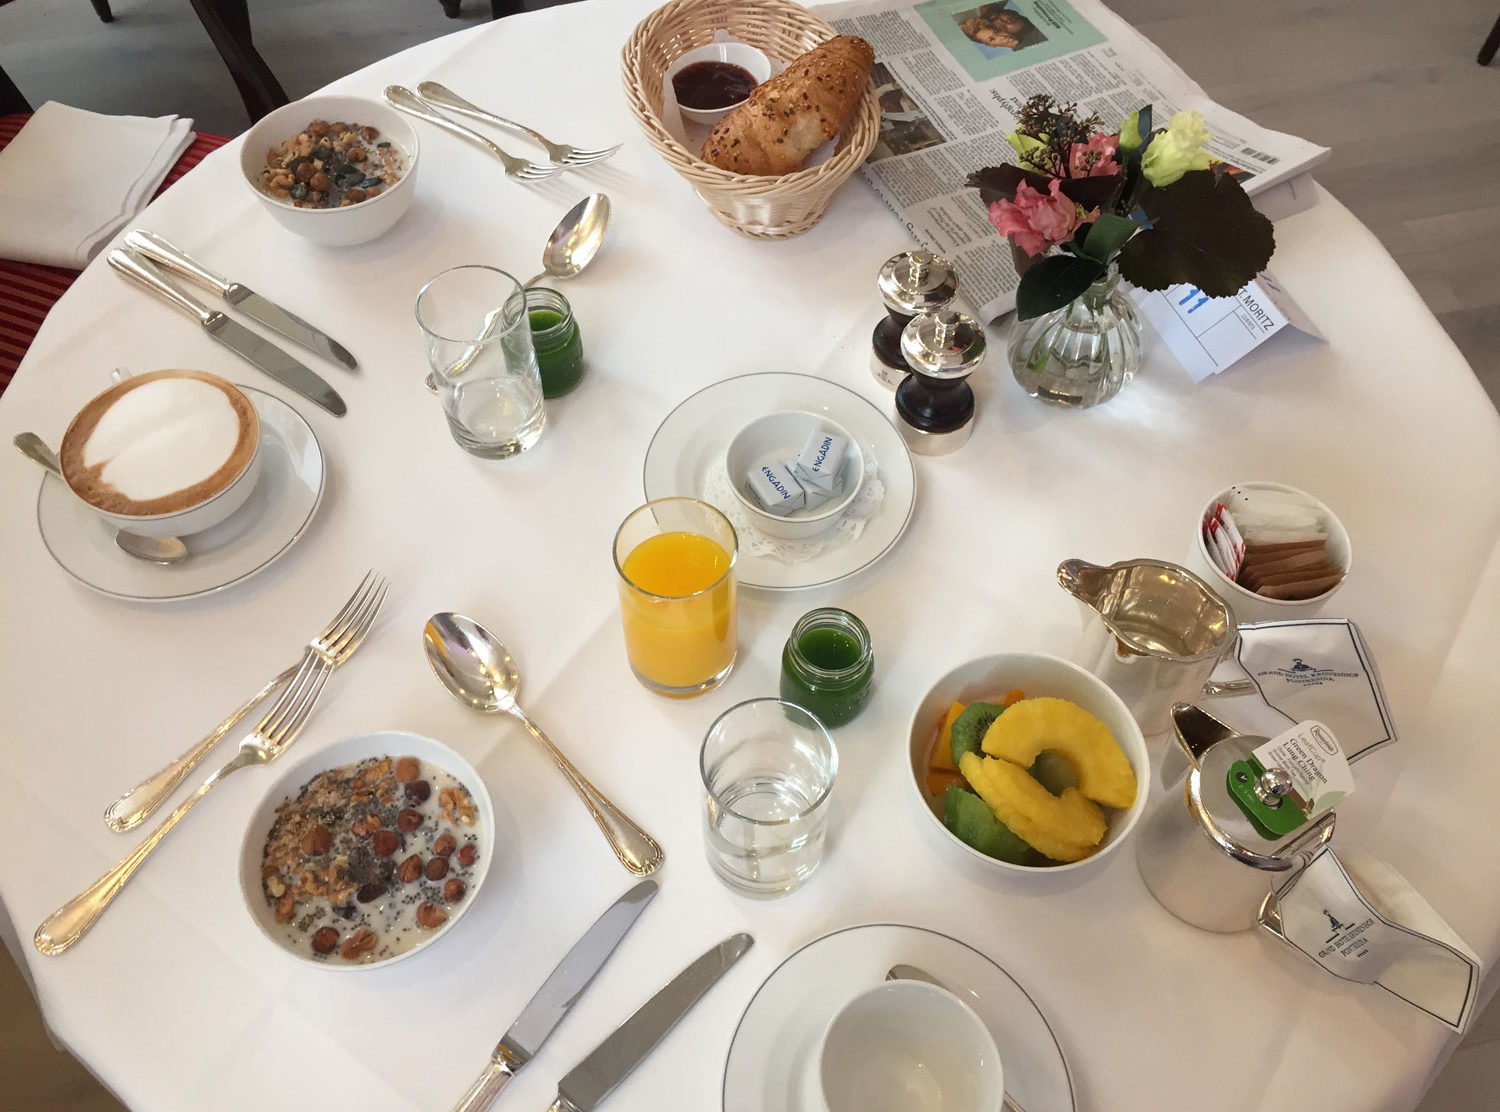 Kulm Hotel St. Moritz A long, lazy breakfast offering local and international specialties